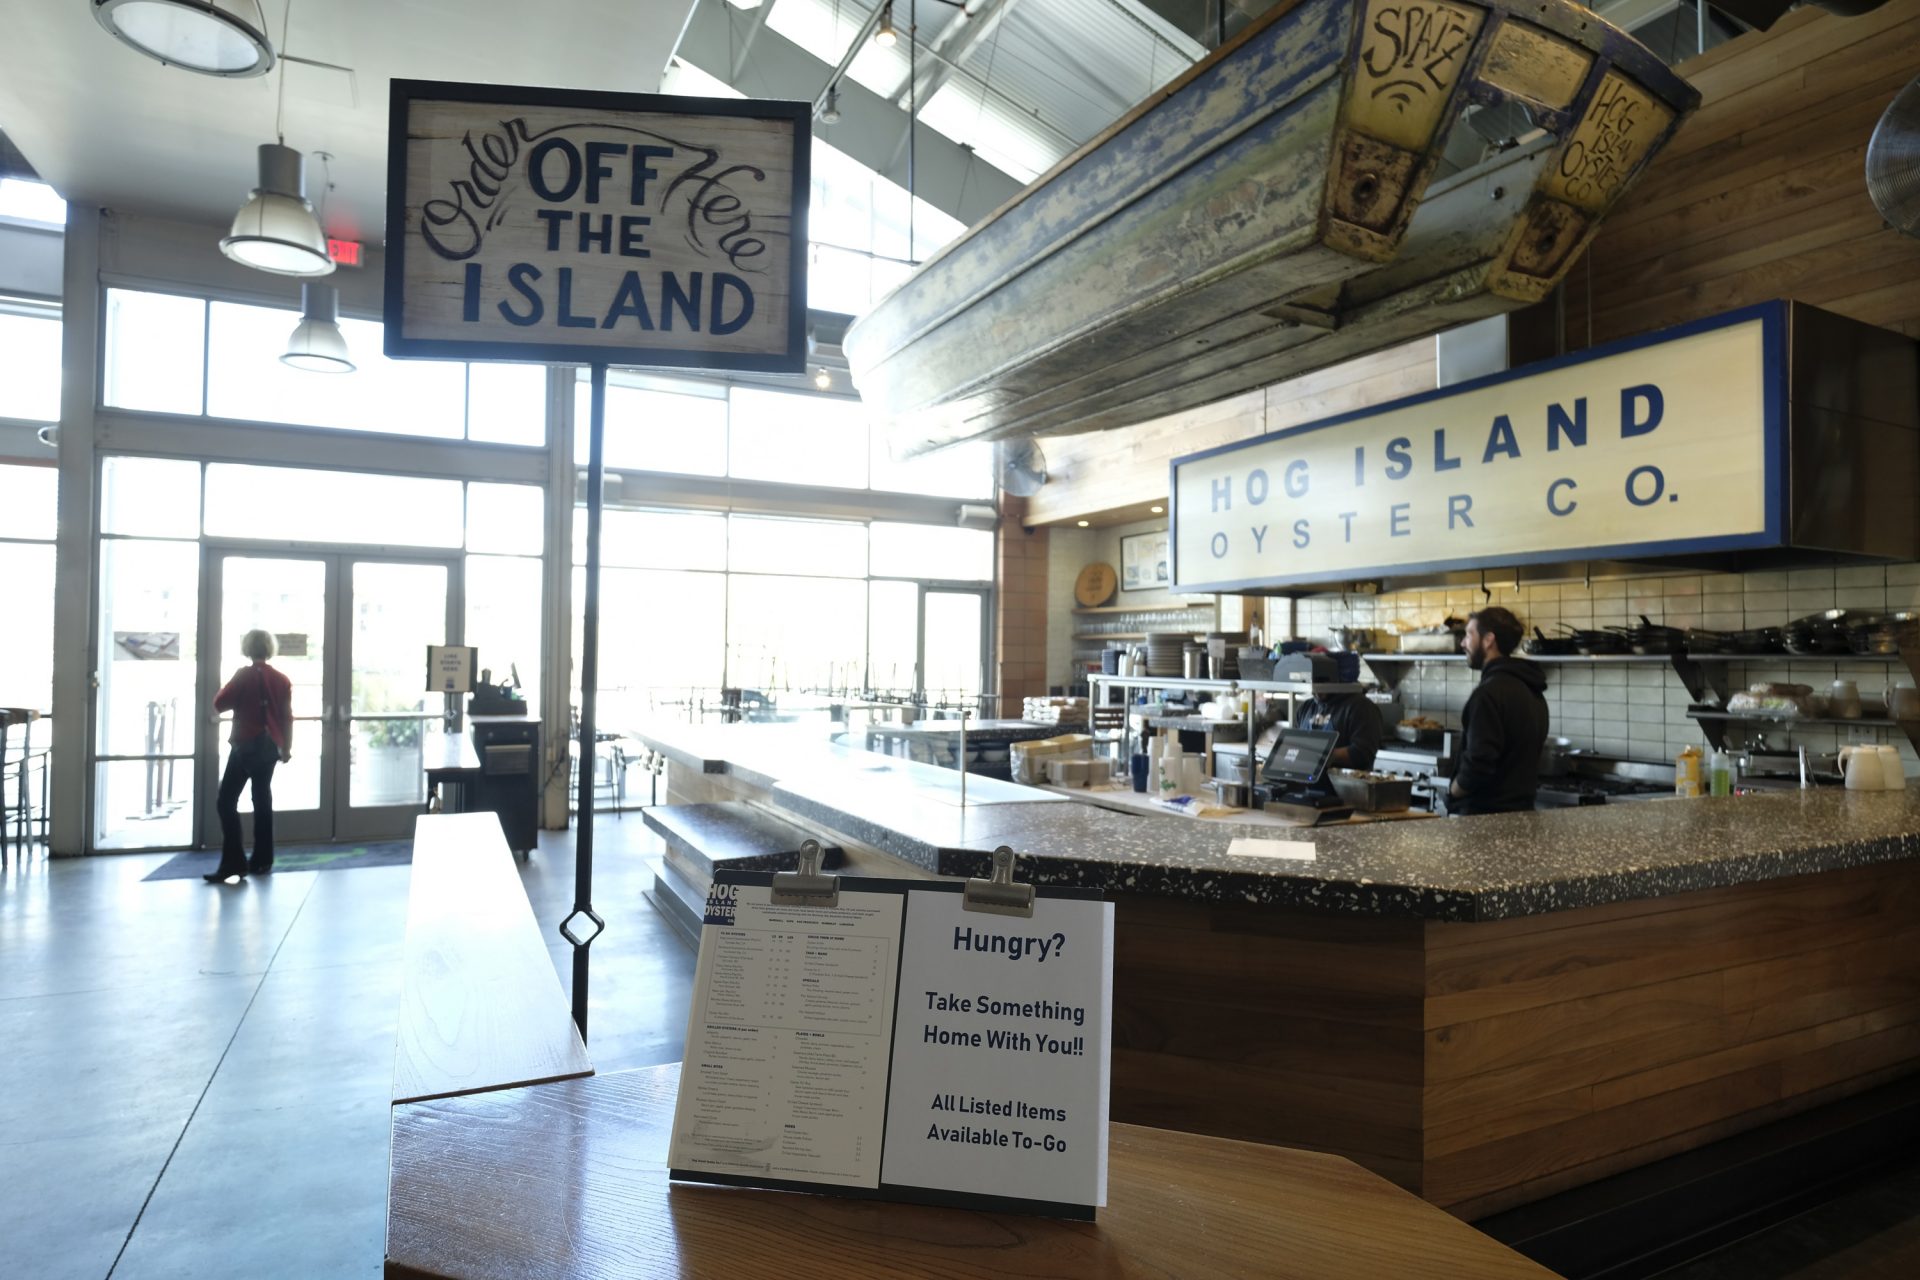 The popular Hog Island Co. oyster bar sits empty at the Oxbow Public Market, but remains open for takeout orders only Thursday, March 19, 2020, in Napa, Calif. As worries about the spread of the coronavirus confine millions of Californians to their homes, concern is growing about those who have no homes in which to shelter